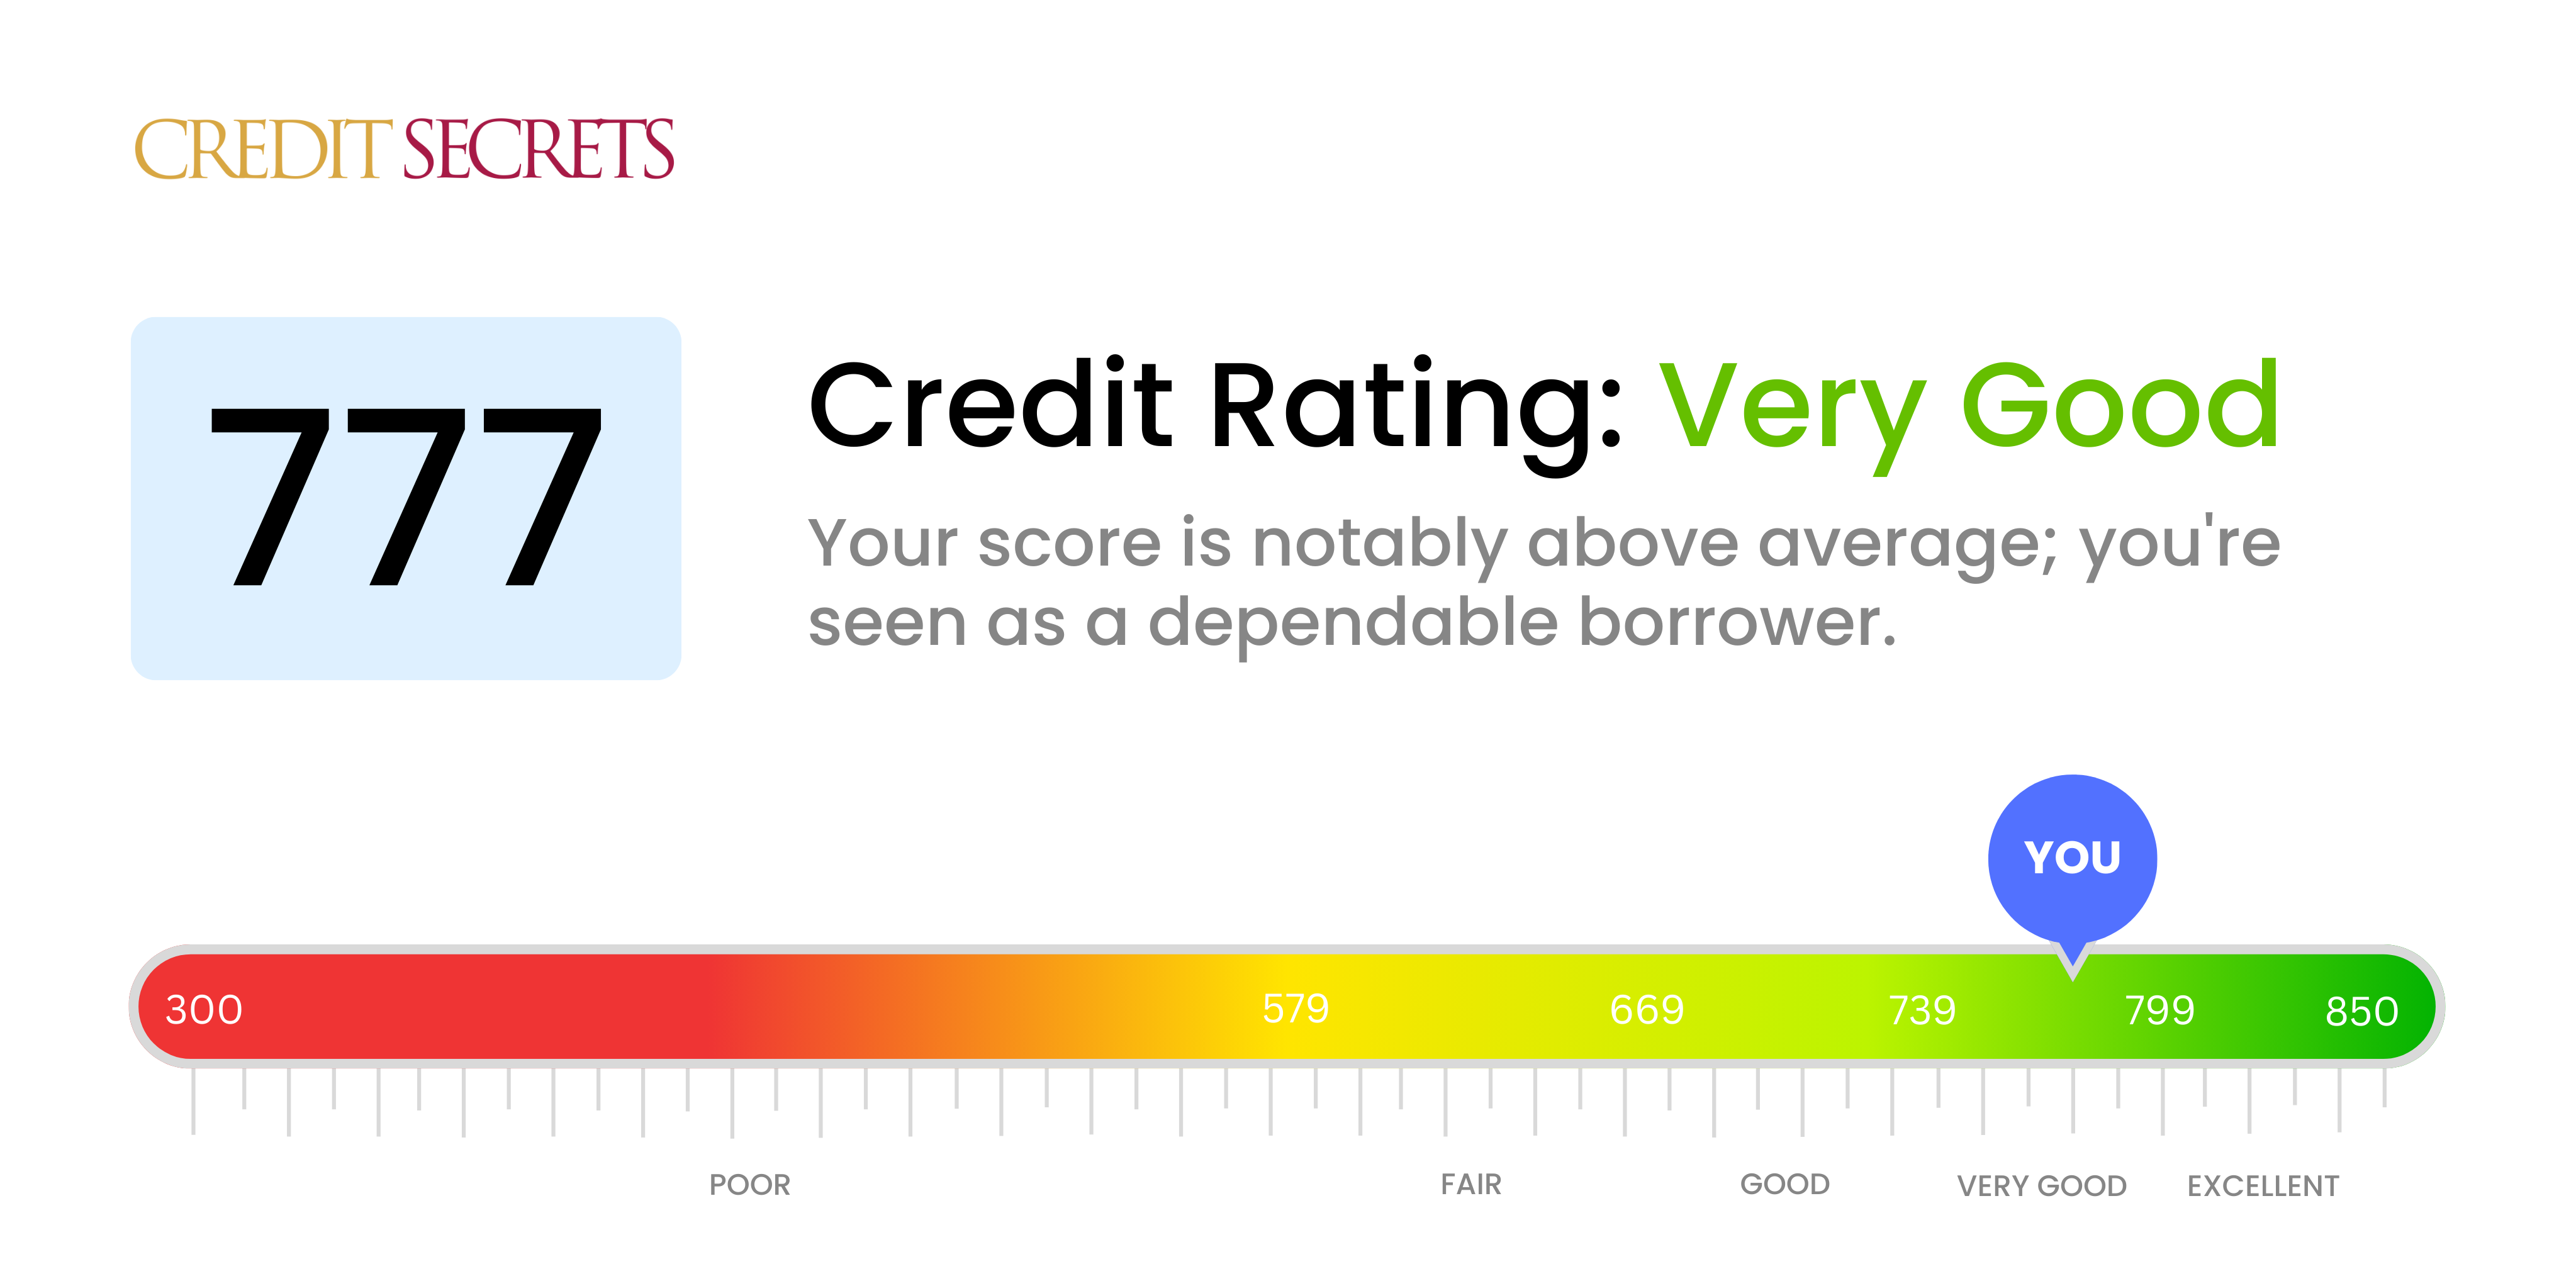 Is 777 a good credit score?